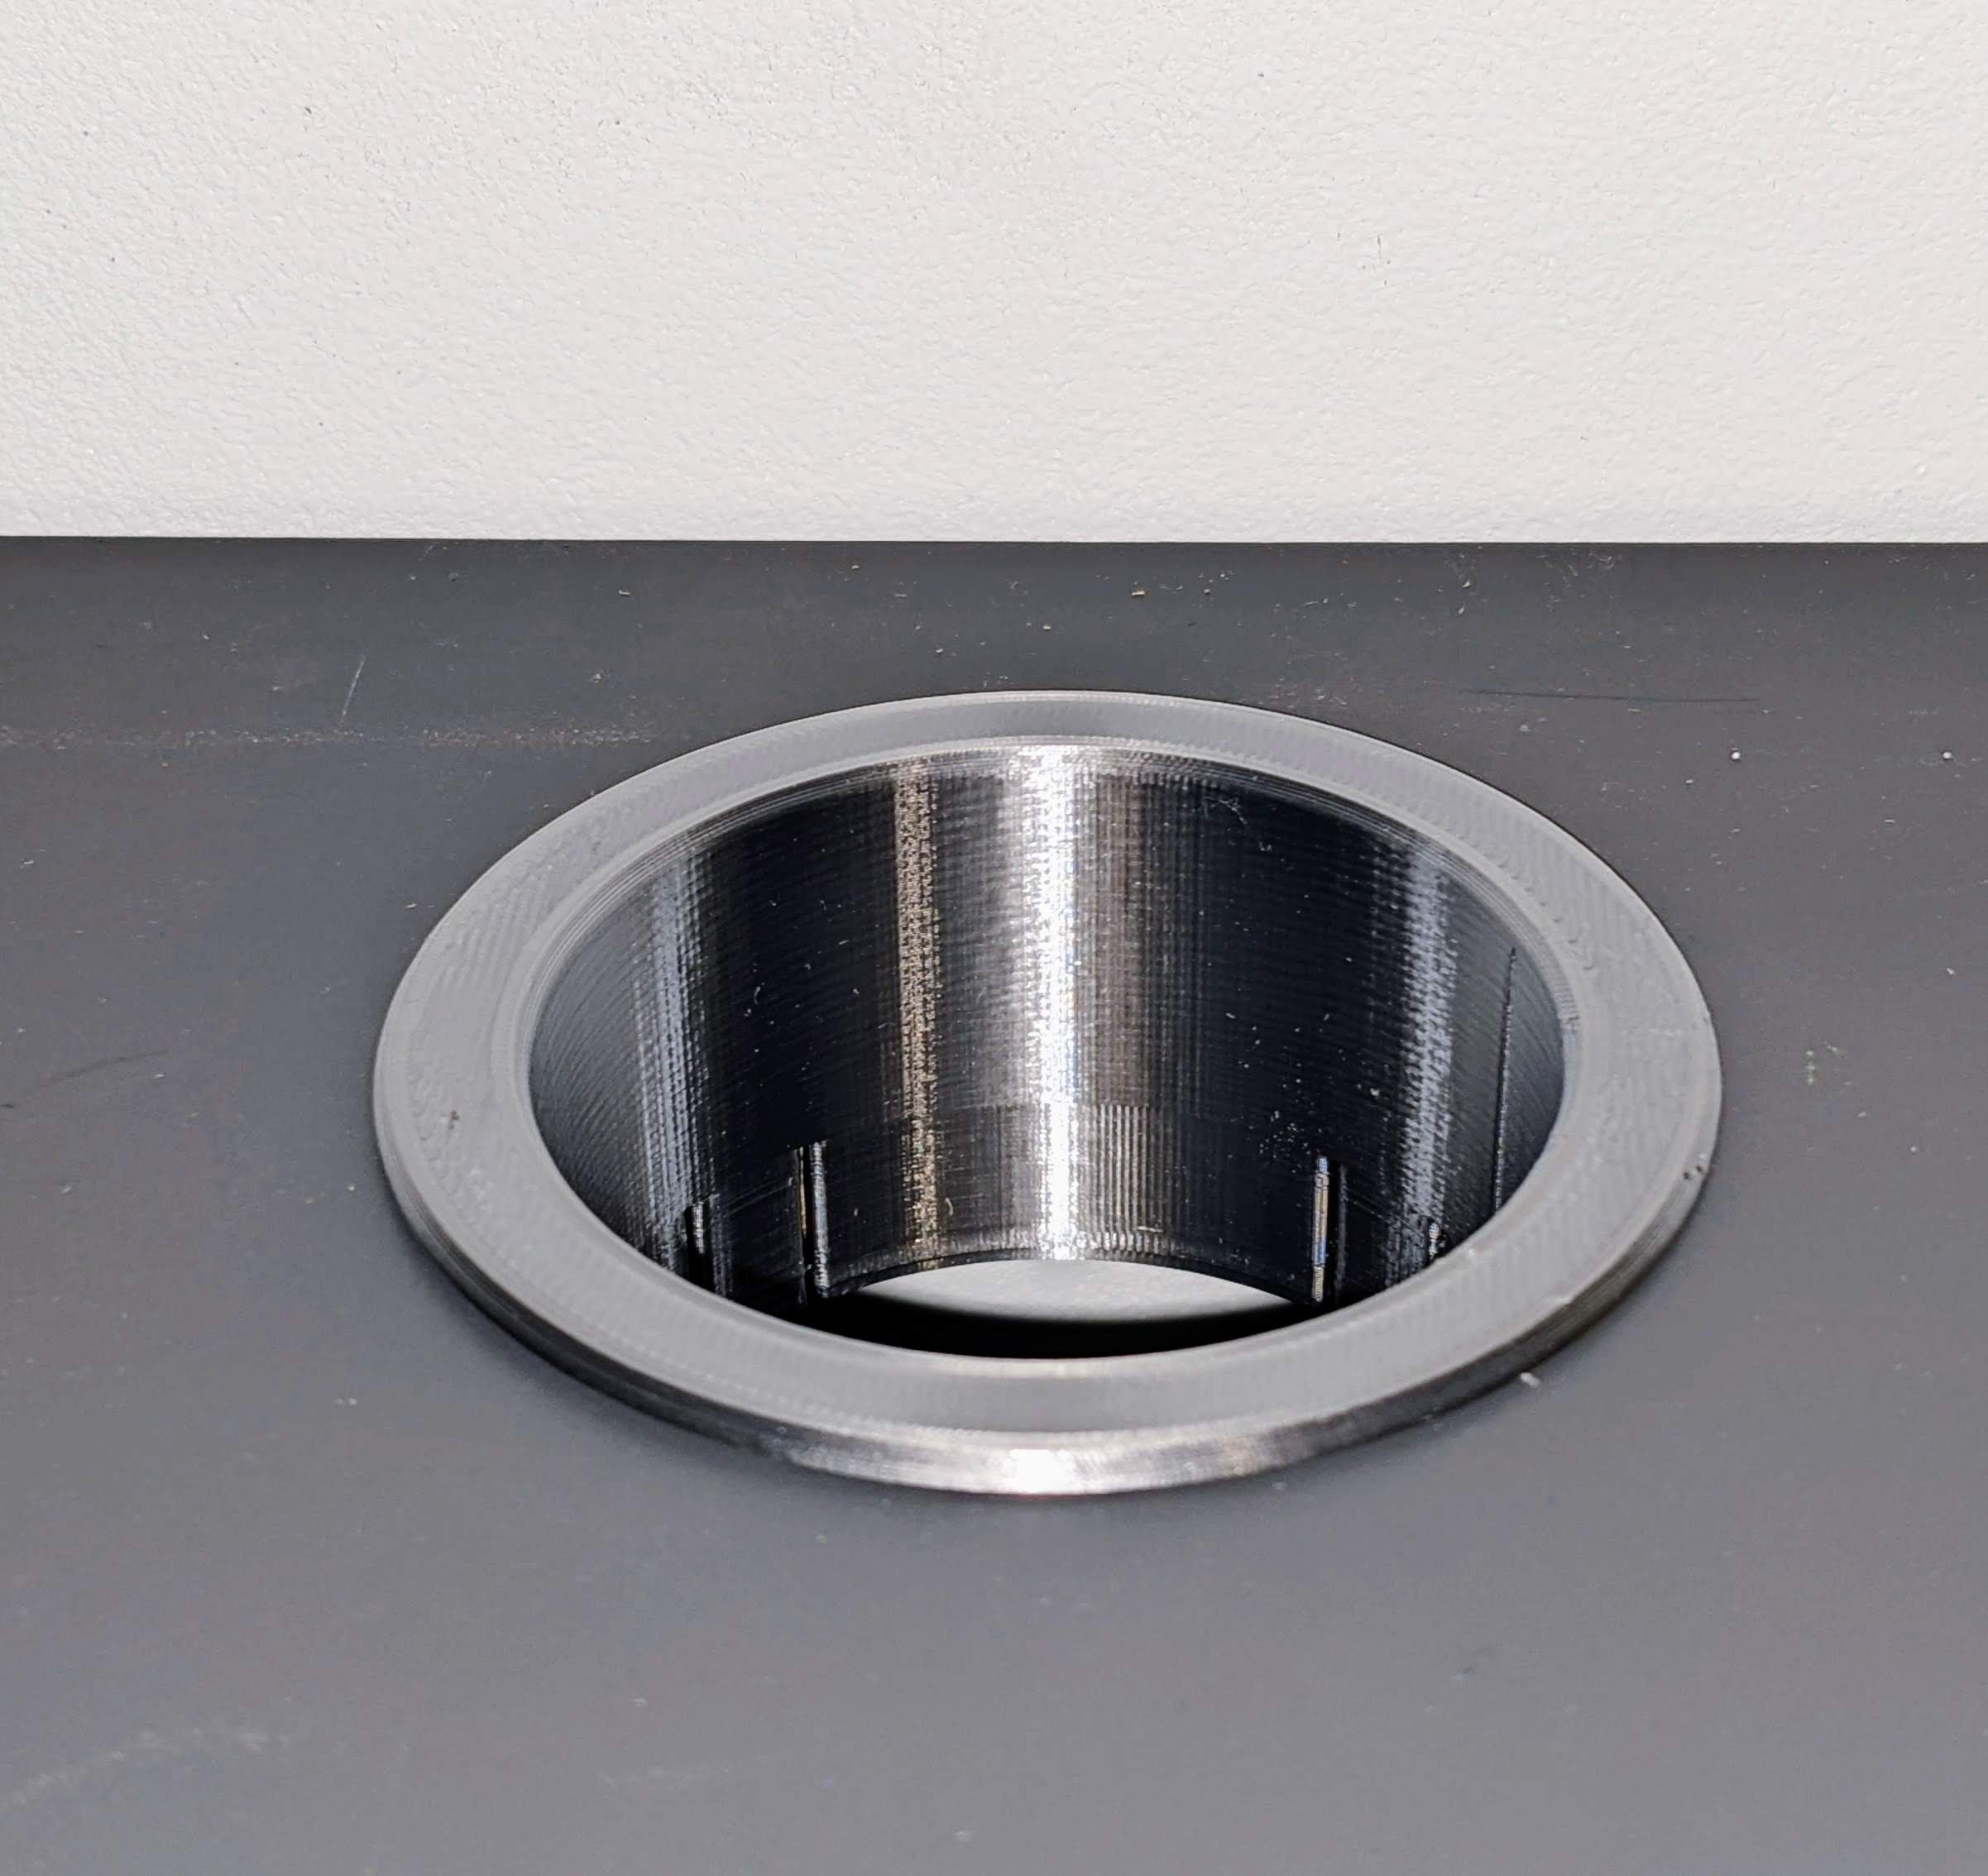 Desk Grommet for many hole sizes and plate thicknesses